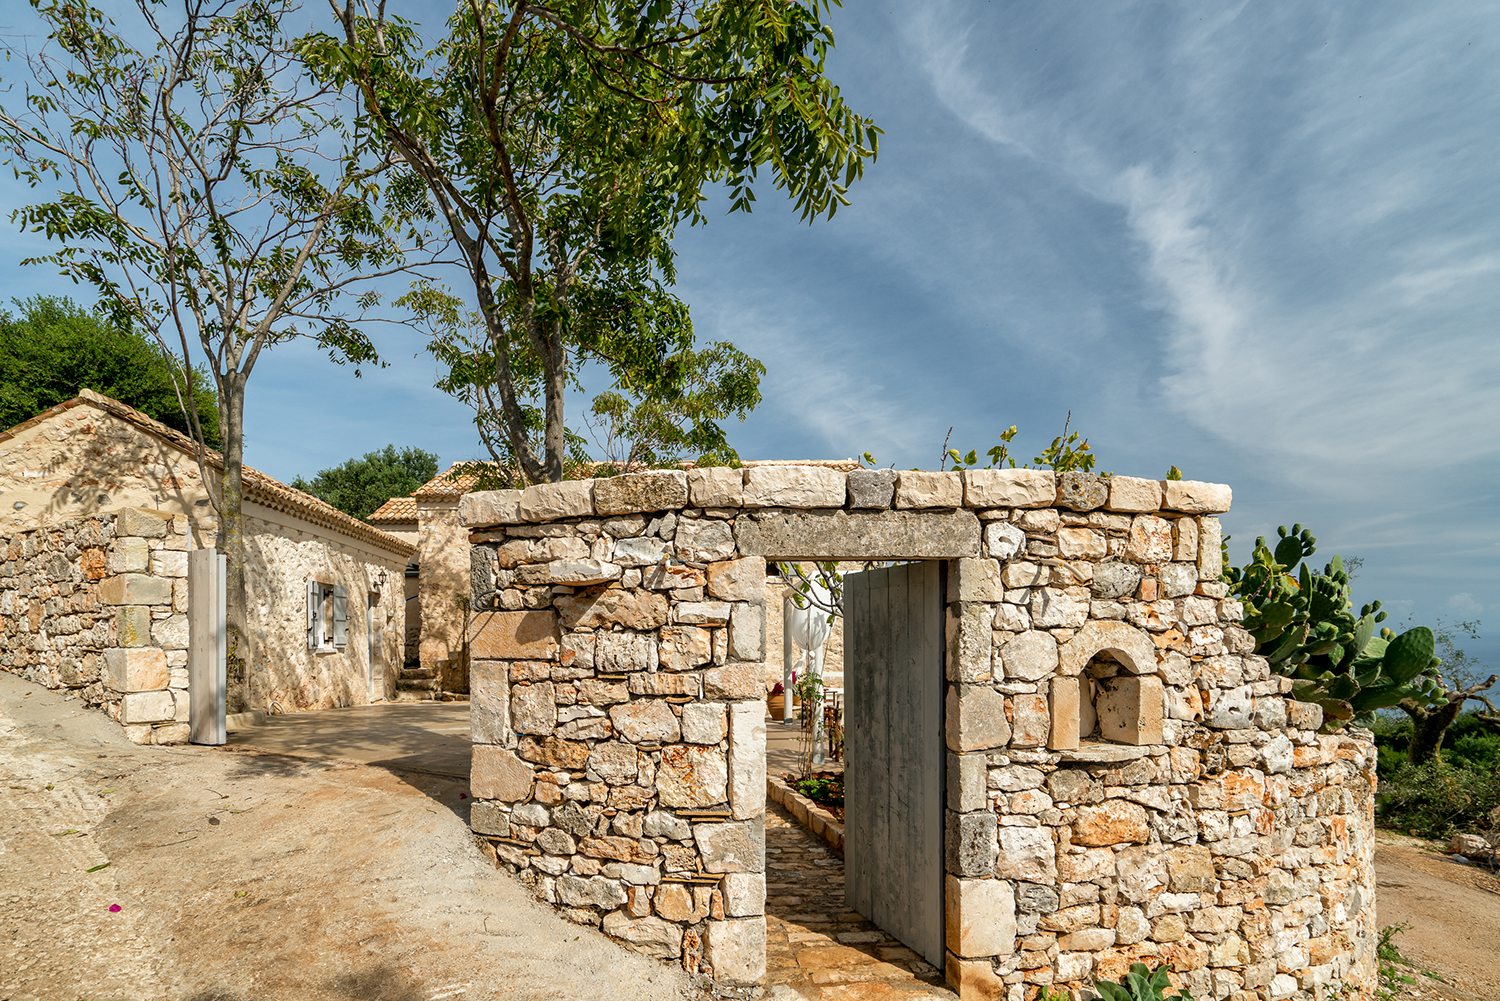 Traditional stone greek villa for 6 people in Zakynthos with blue wooden shutters and plants in terracotta pots